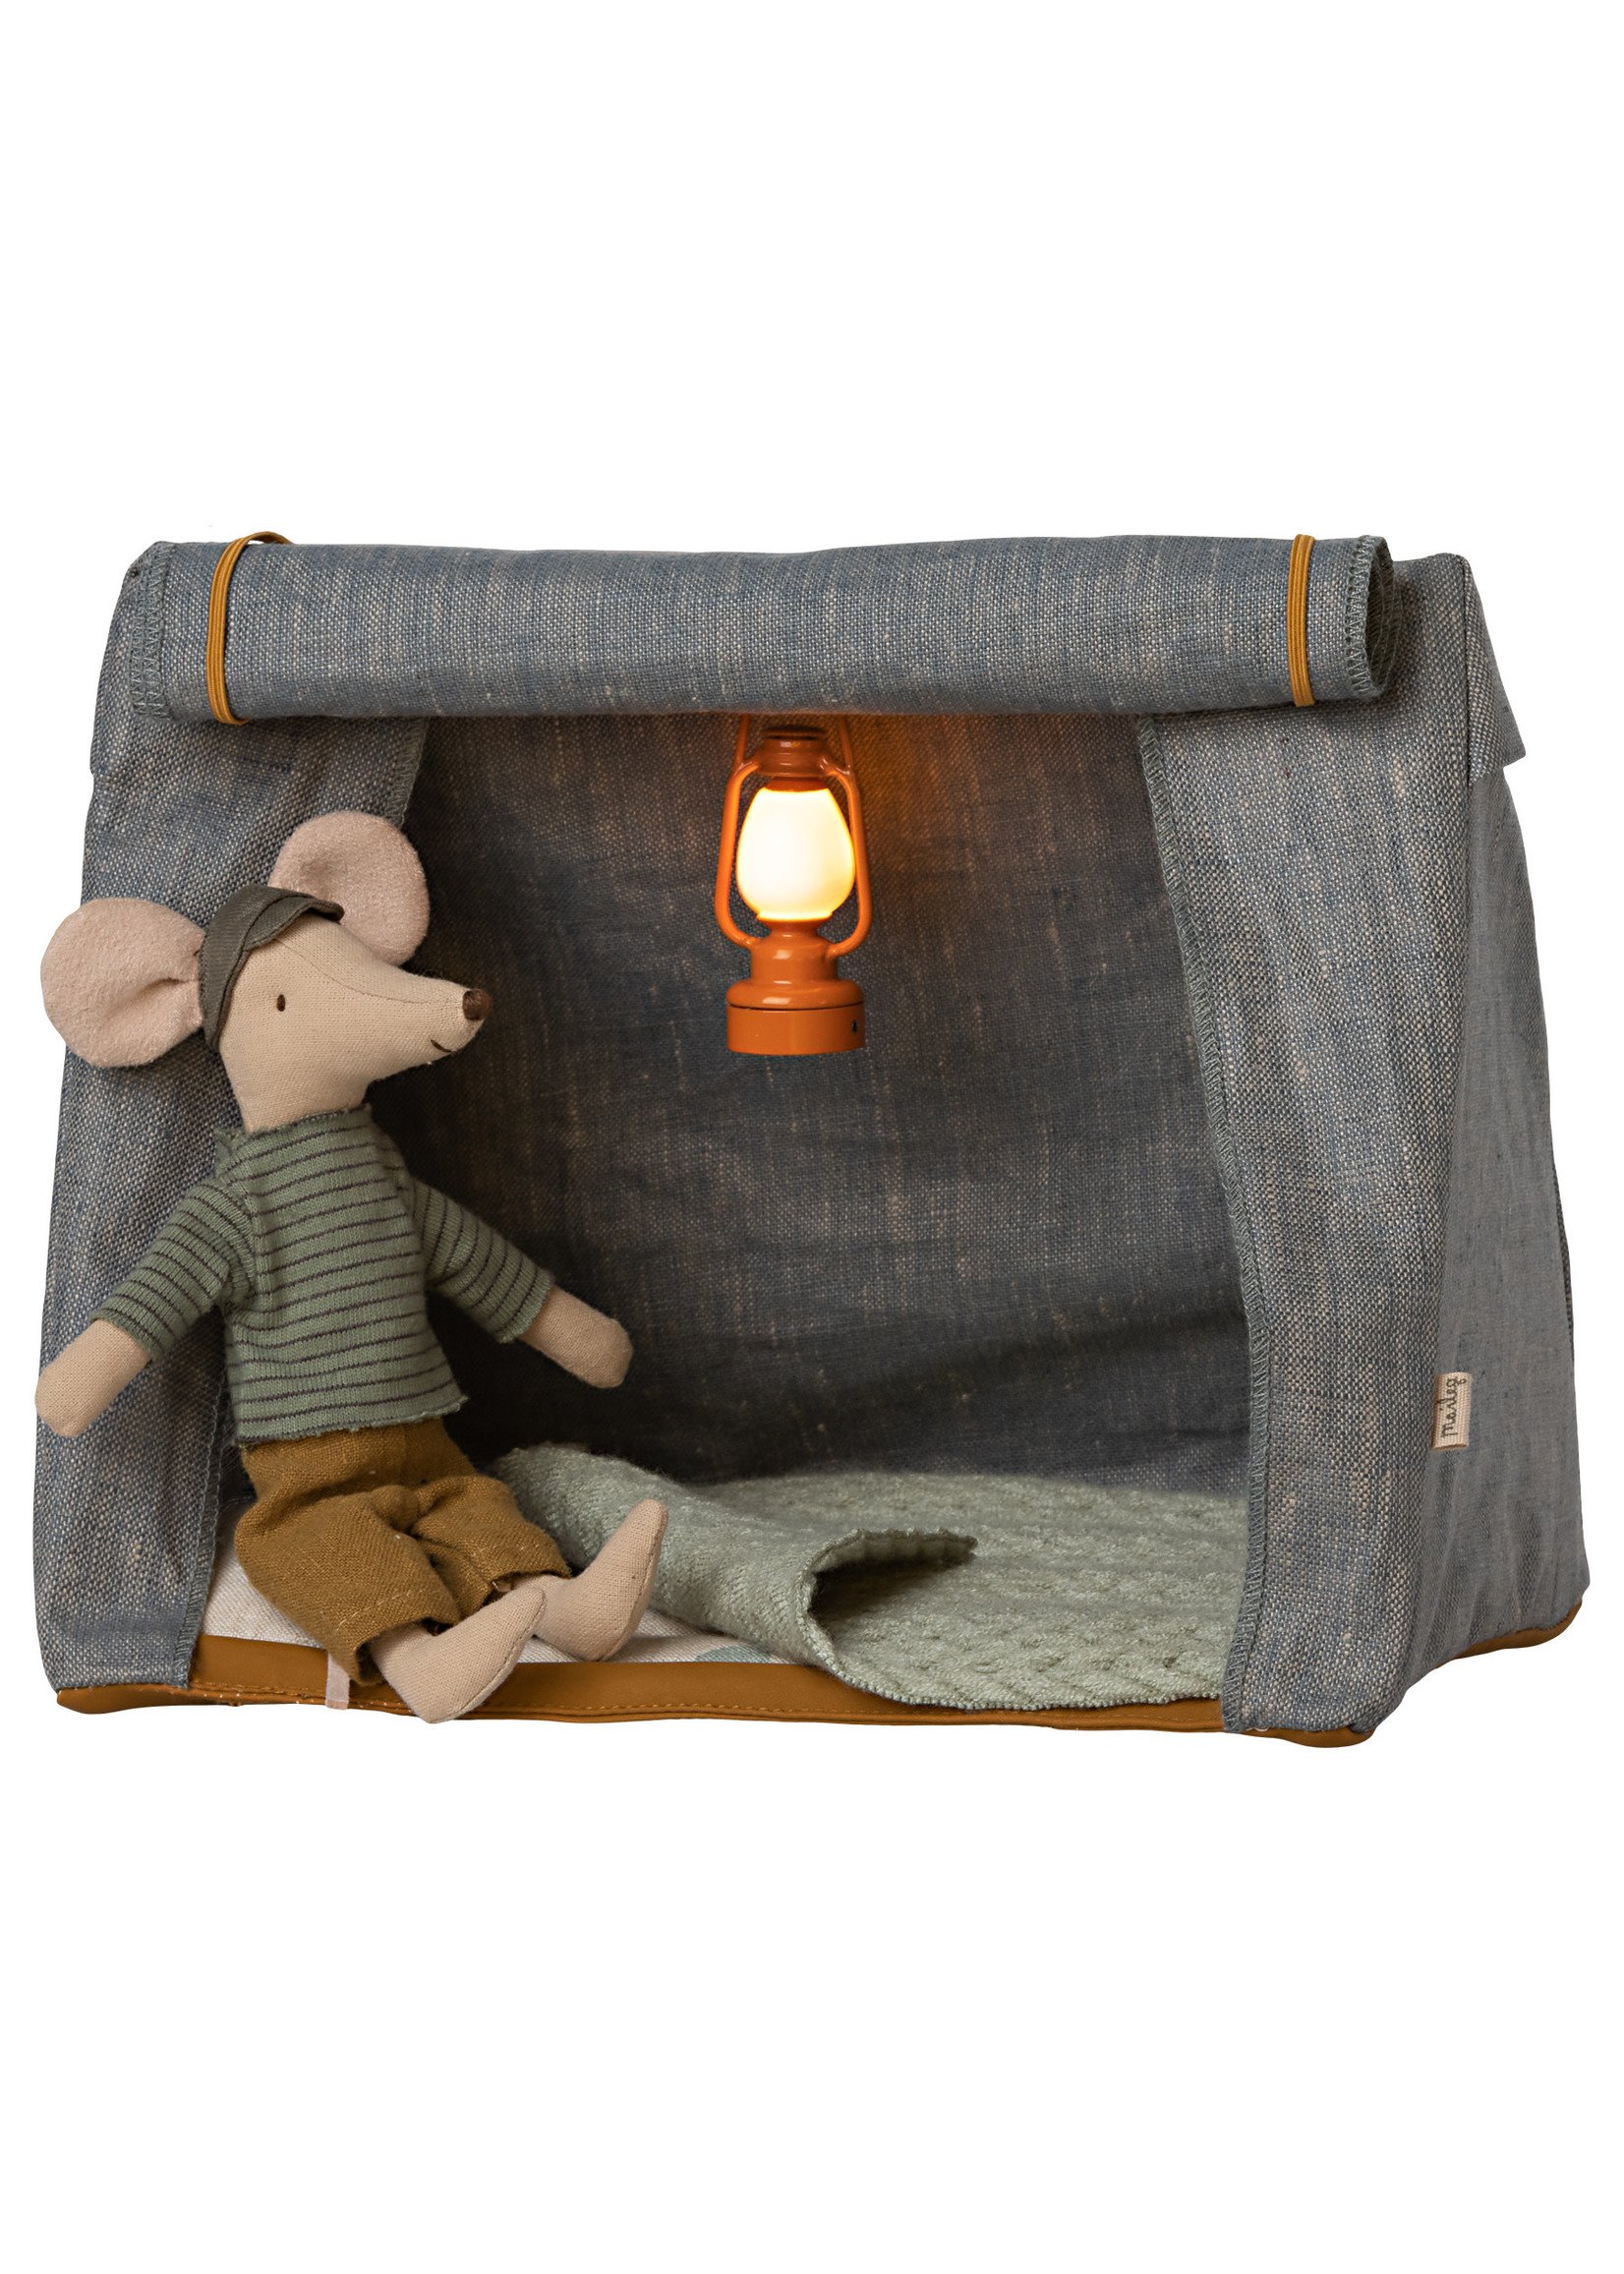 Maileg Happy Camper Tent - Mouse